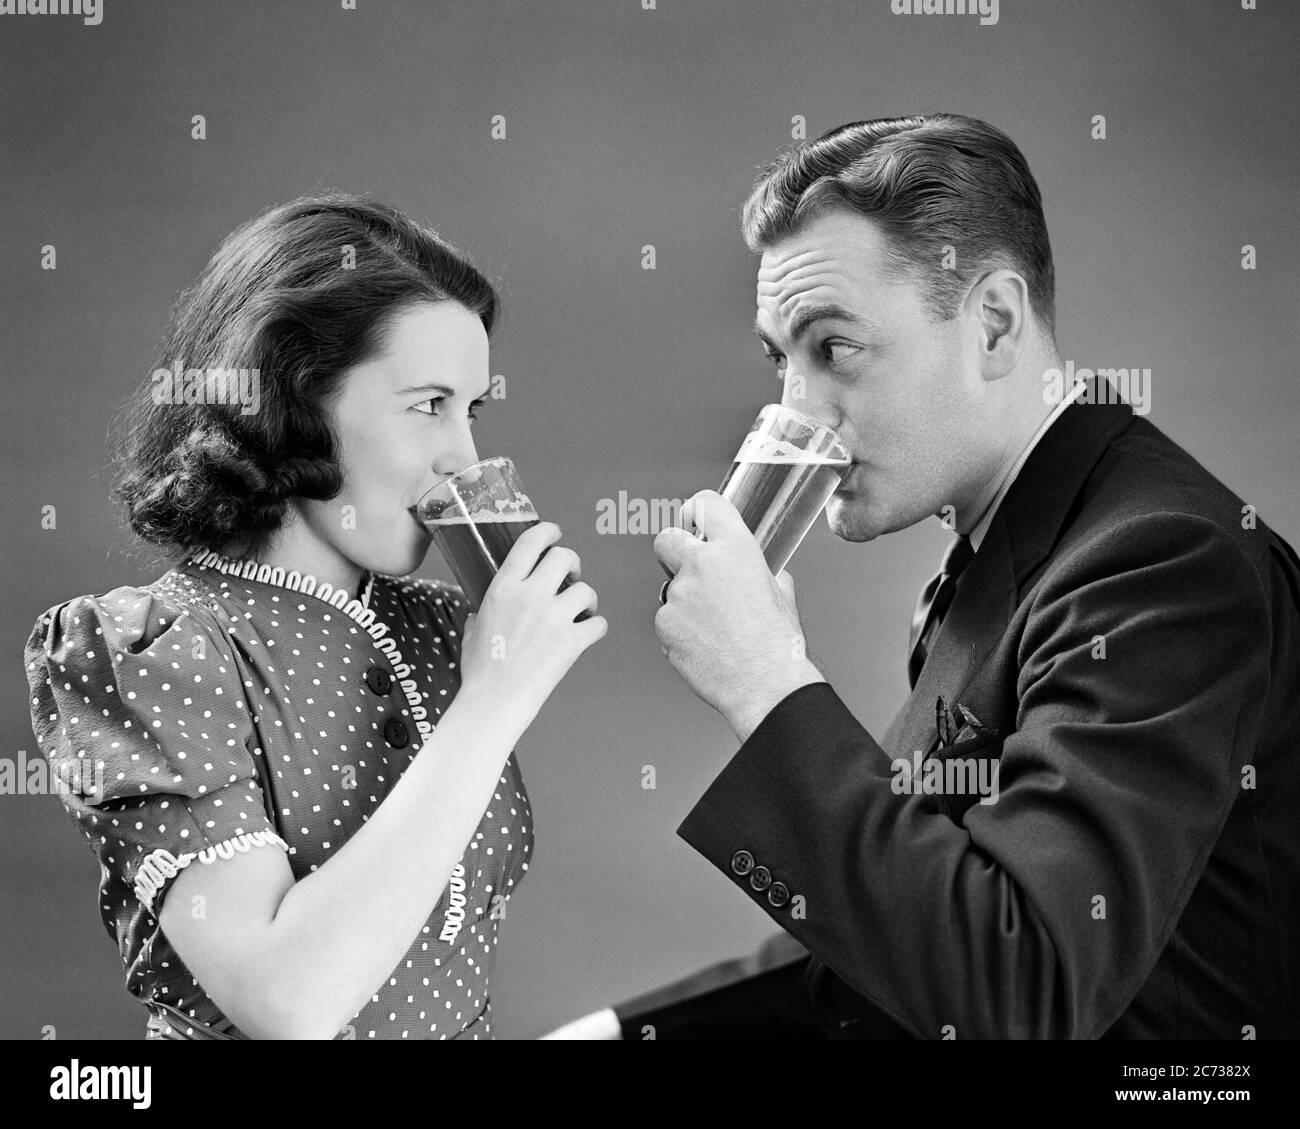 1940s COUPLE FACING ONE ANOTHER EACH DRINKING A GLASS OF BEER WOMAN WEARING POLKA DOT DRESS MAN A SUIT AND TIE - f9748 HAR001 HARS SATISFACTION FEMALES MARRIED STUDIO SHOT SPOUSE HUSBANDS HOME LIFE FACING COPY SPACE FRIENDSHIP HALF-LENGTH LADIES PERSONS MALES B&W PARTNER DATING DOT BEVERAGE POLKA AND FLUID CONNECTION ANOTHER BREWSKI TOGETHERNESS WIVES YOUNG ADULT MAN YOUNG ADULT WOMAN BEVERAGES BLACK AND WHITE CAUCASIAN ETHNICITY HAR001 OLD FASHIONED Stock Photo